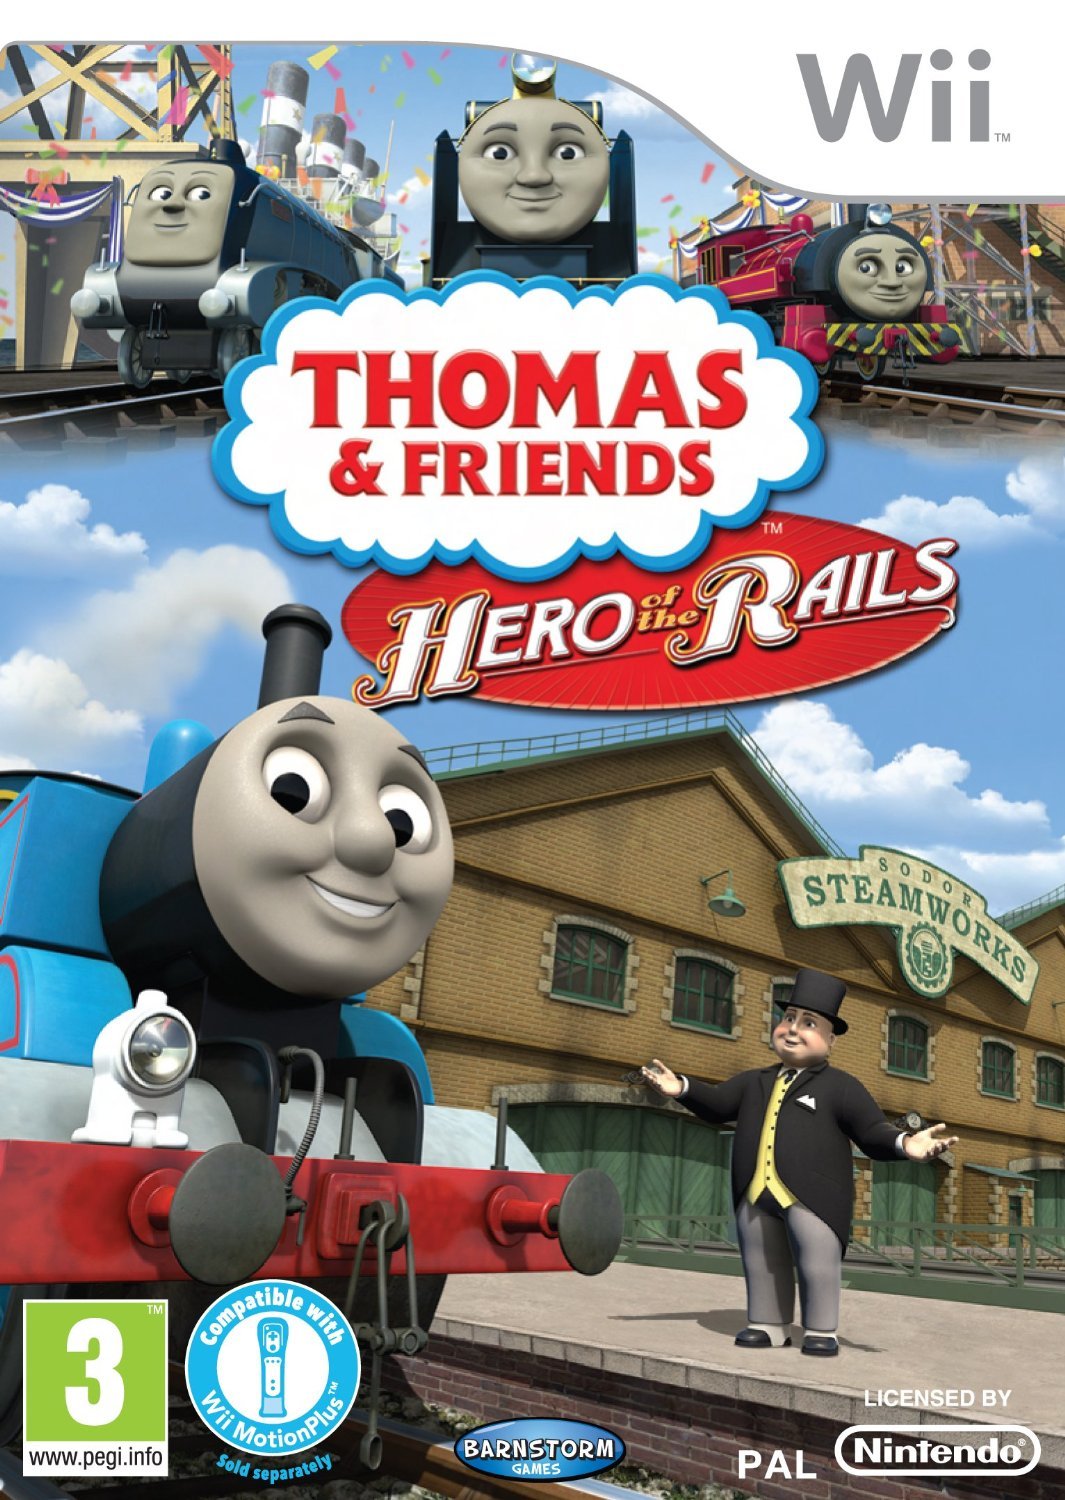 Image of Thomas & Friends Hero of the Rails